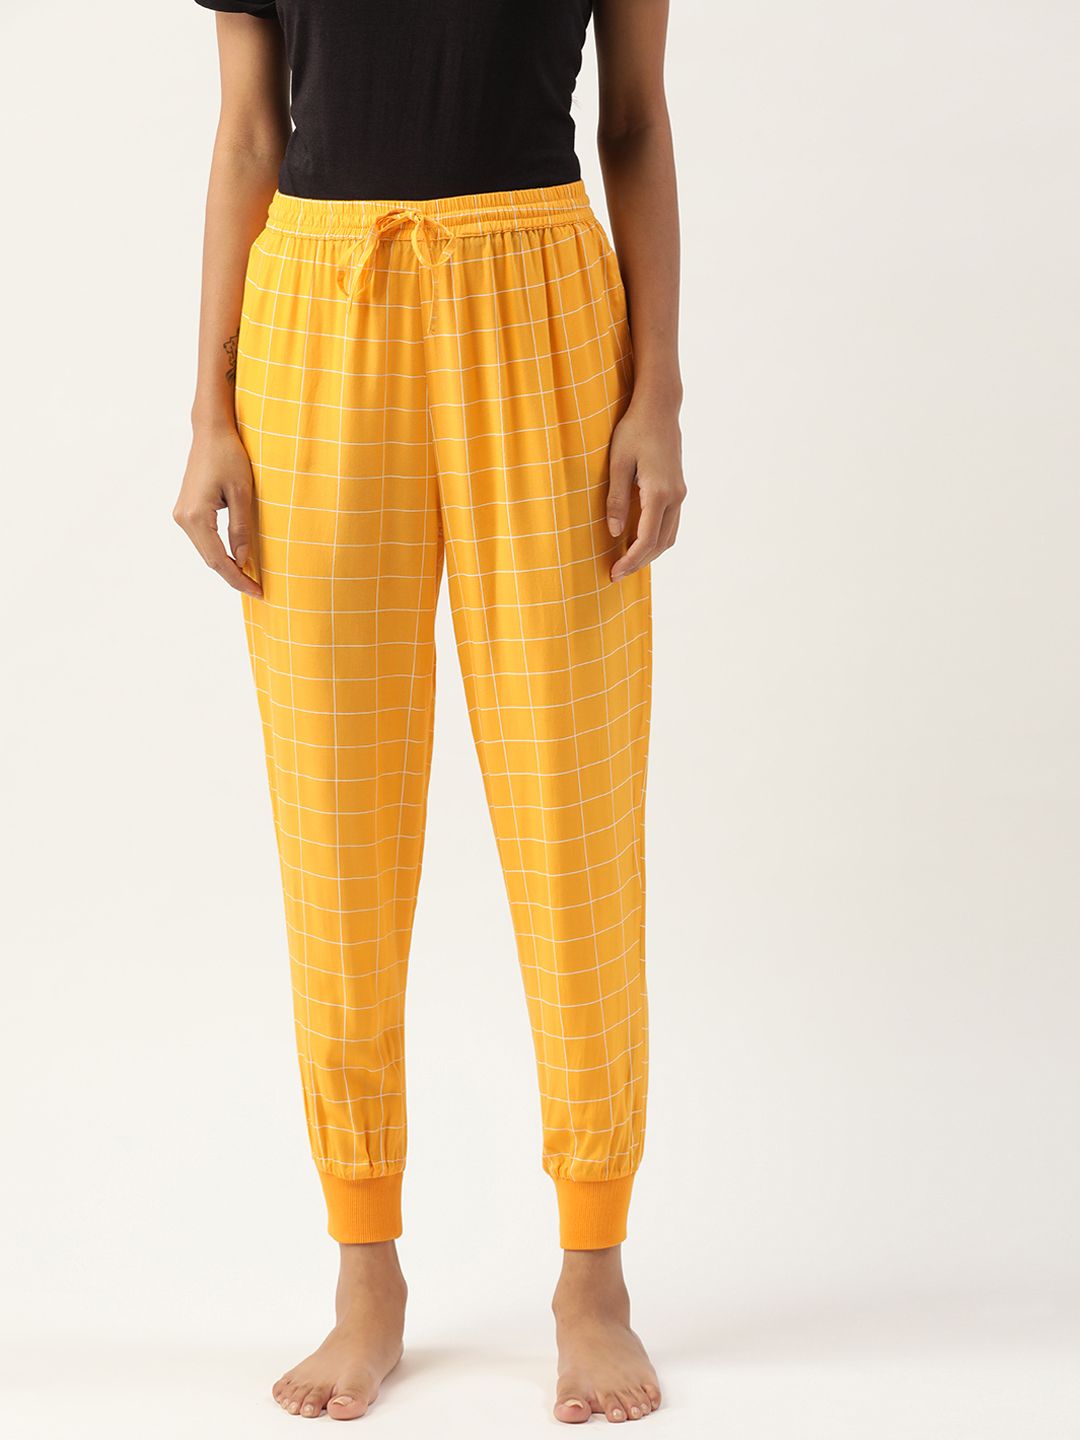 ETC Women Yellow & White Checked Jogger Style Lounge Pants Price in India